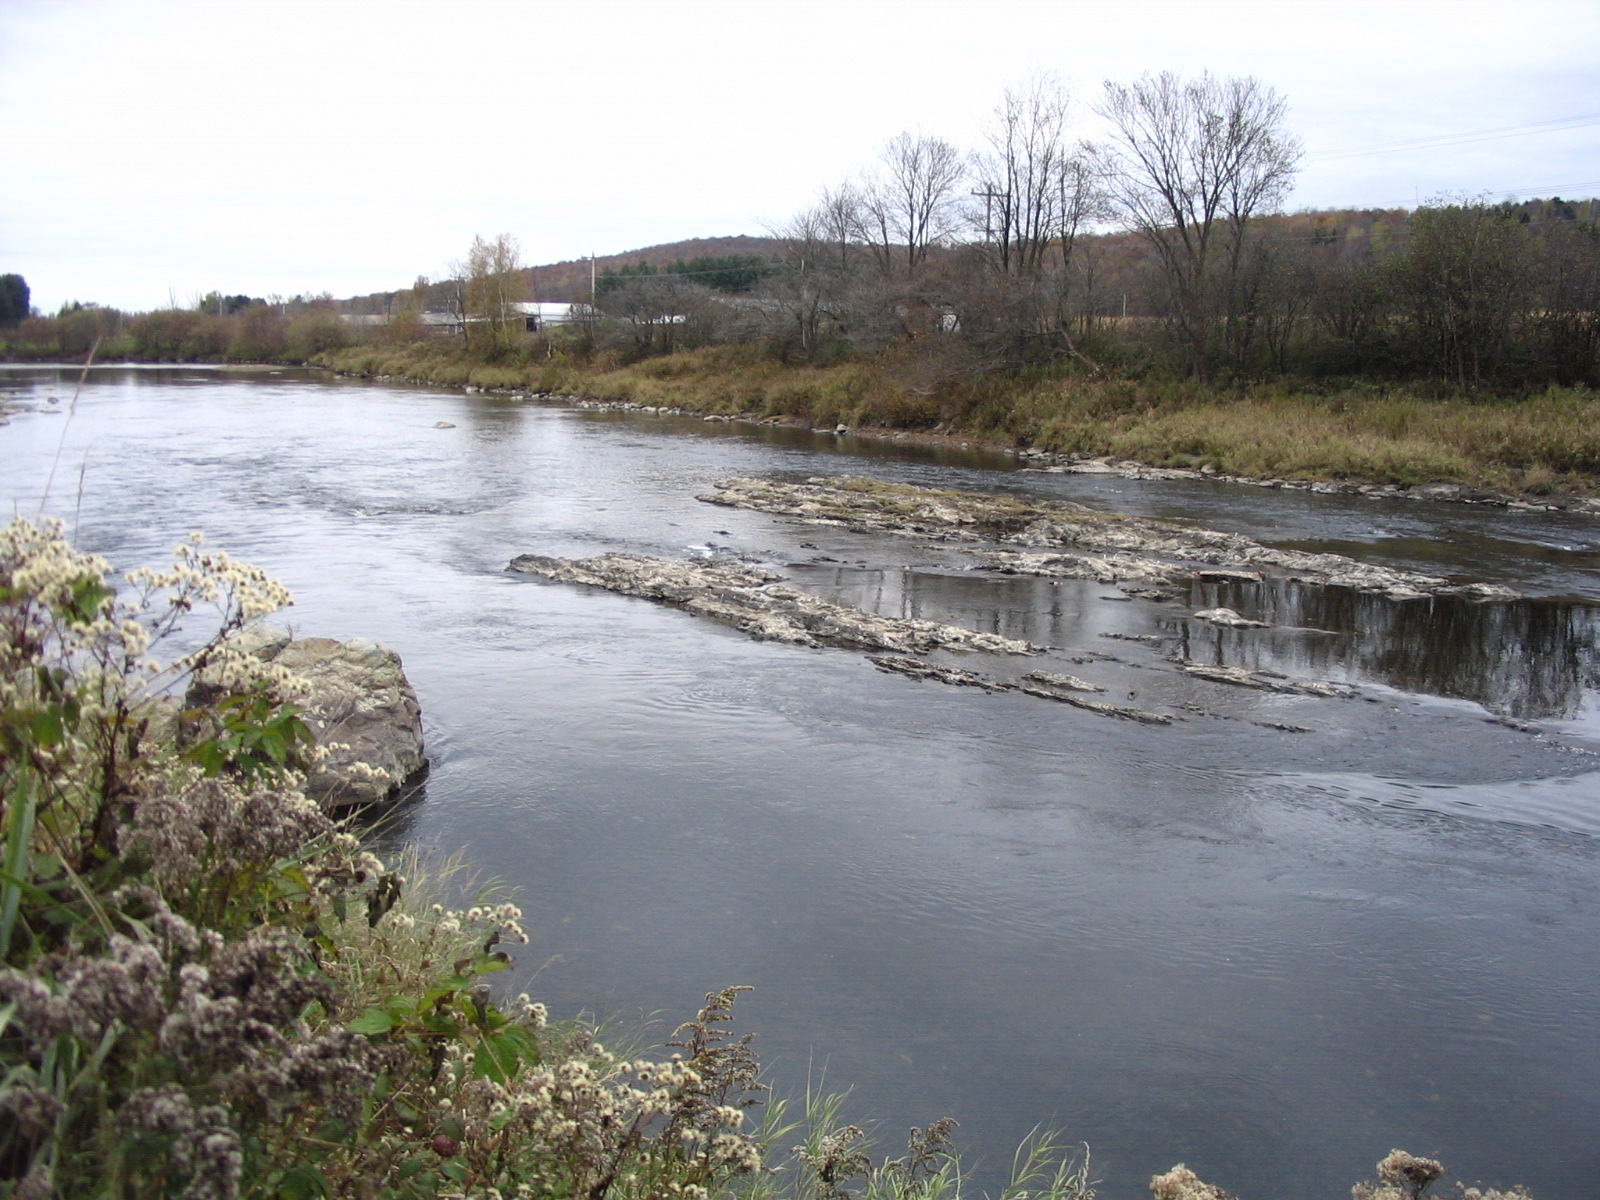 Photograph of the Missisquoi River at East Berkshire, VT (EBKV1) looking downstream